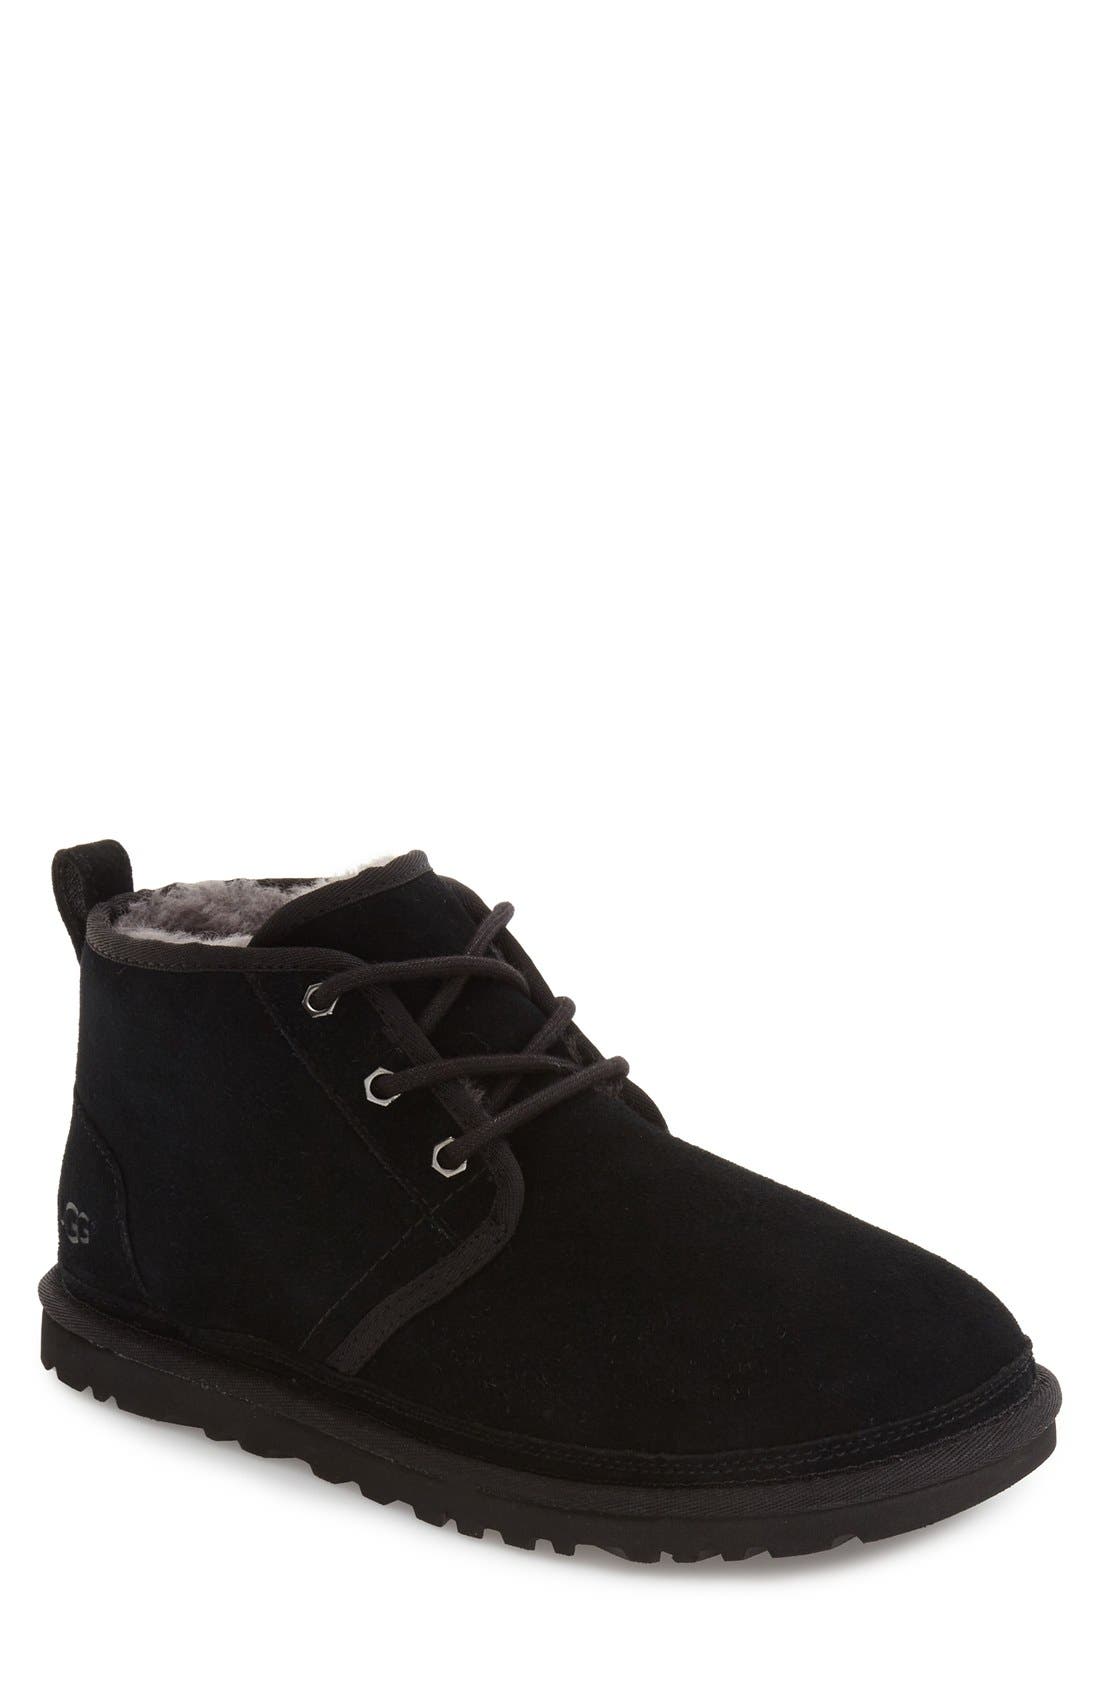 ugg neumel classic boots